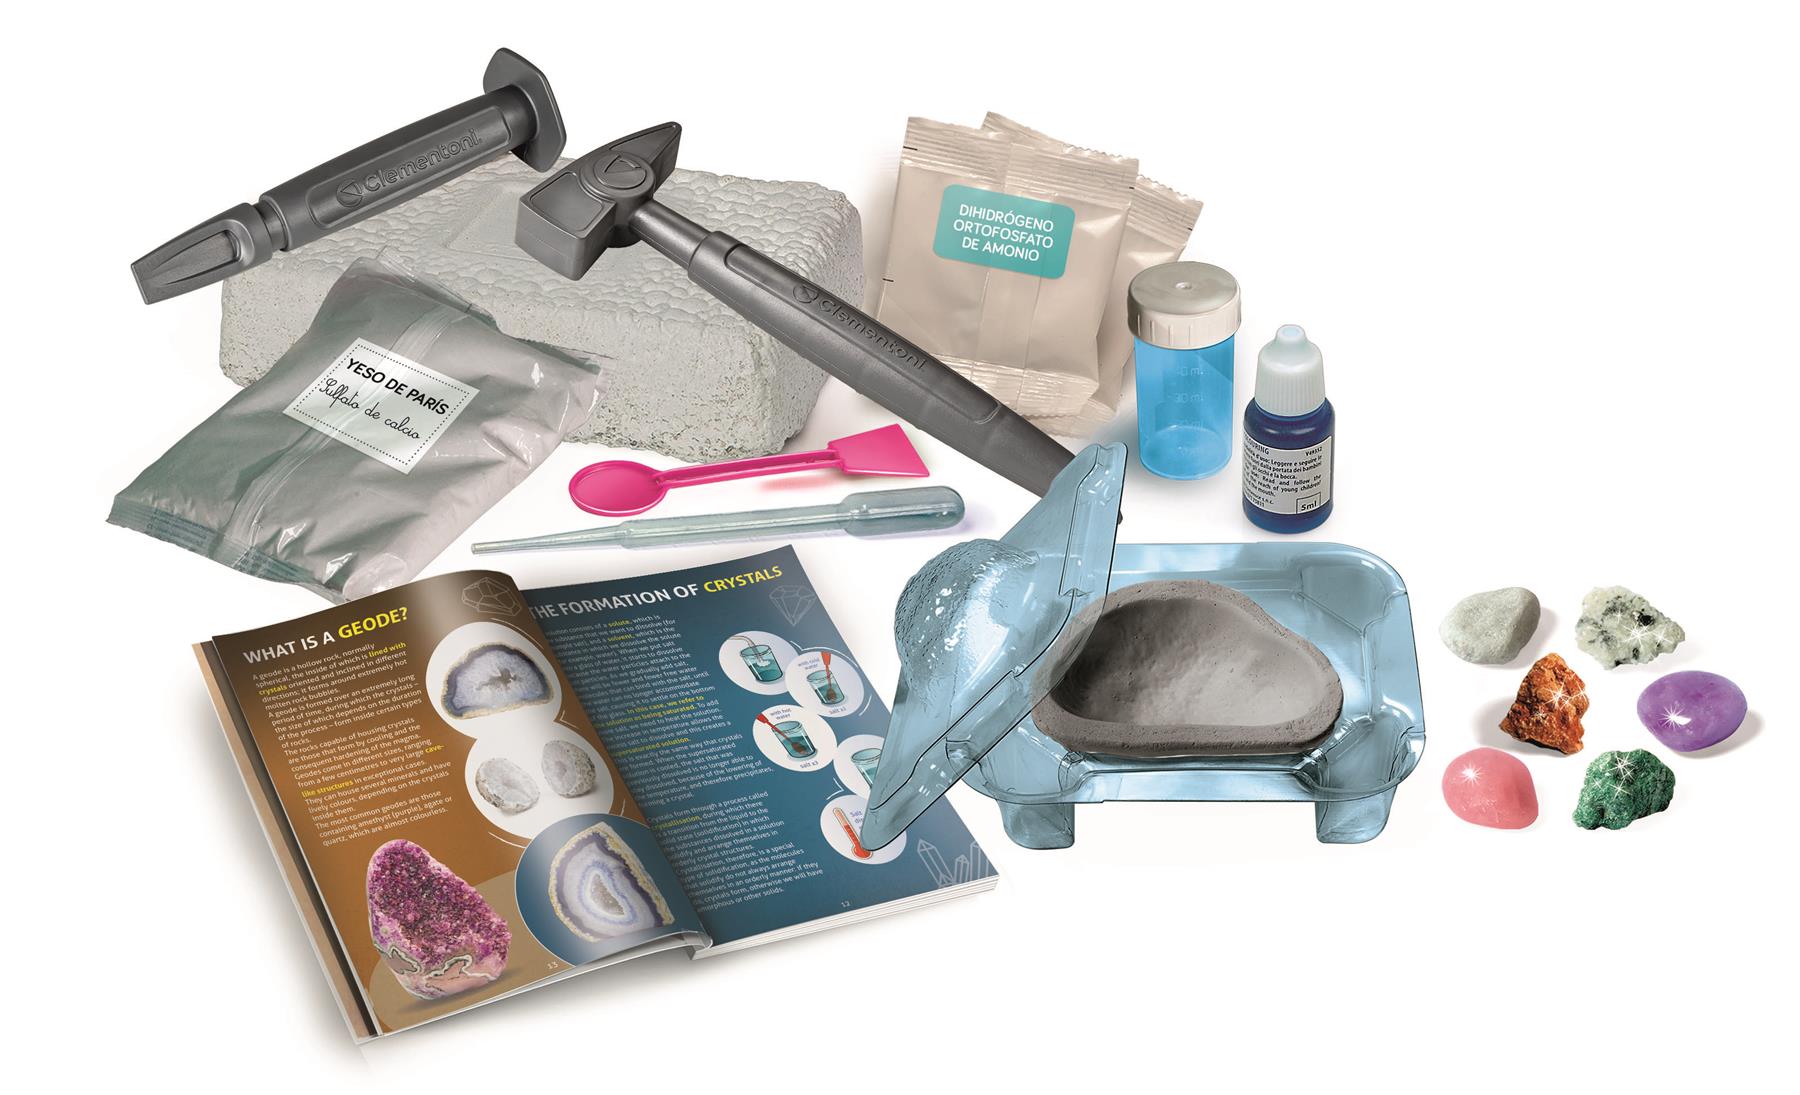 Minerals and Geodes Science Kit